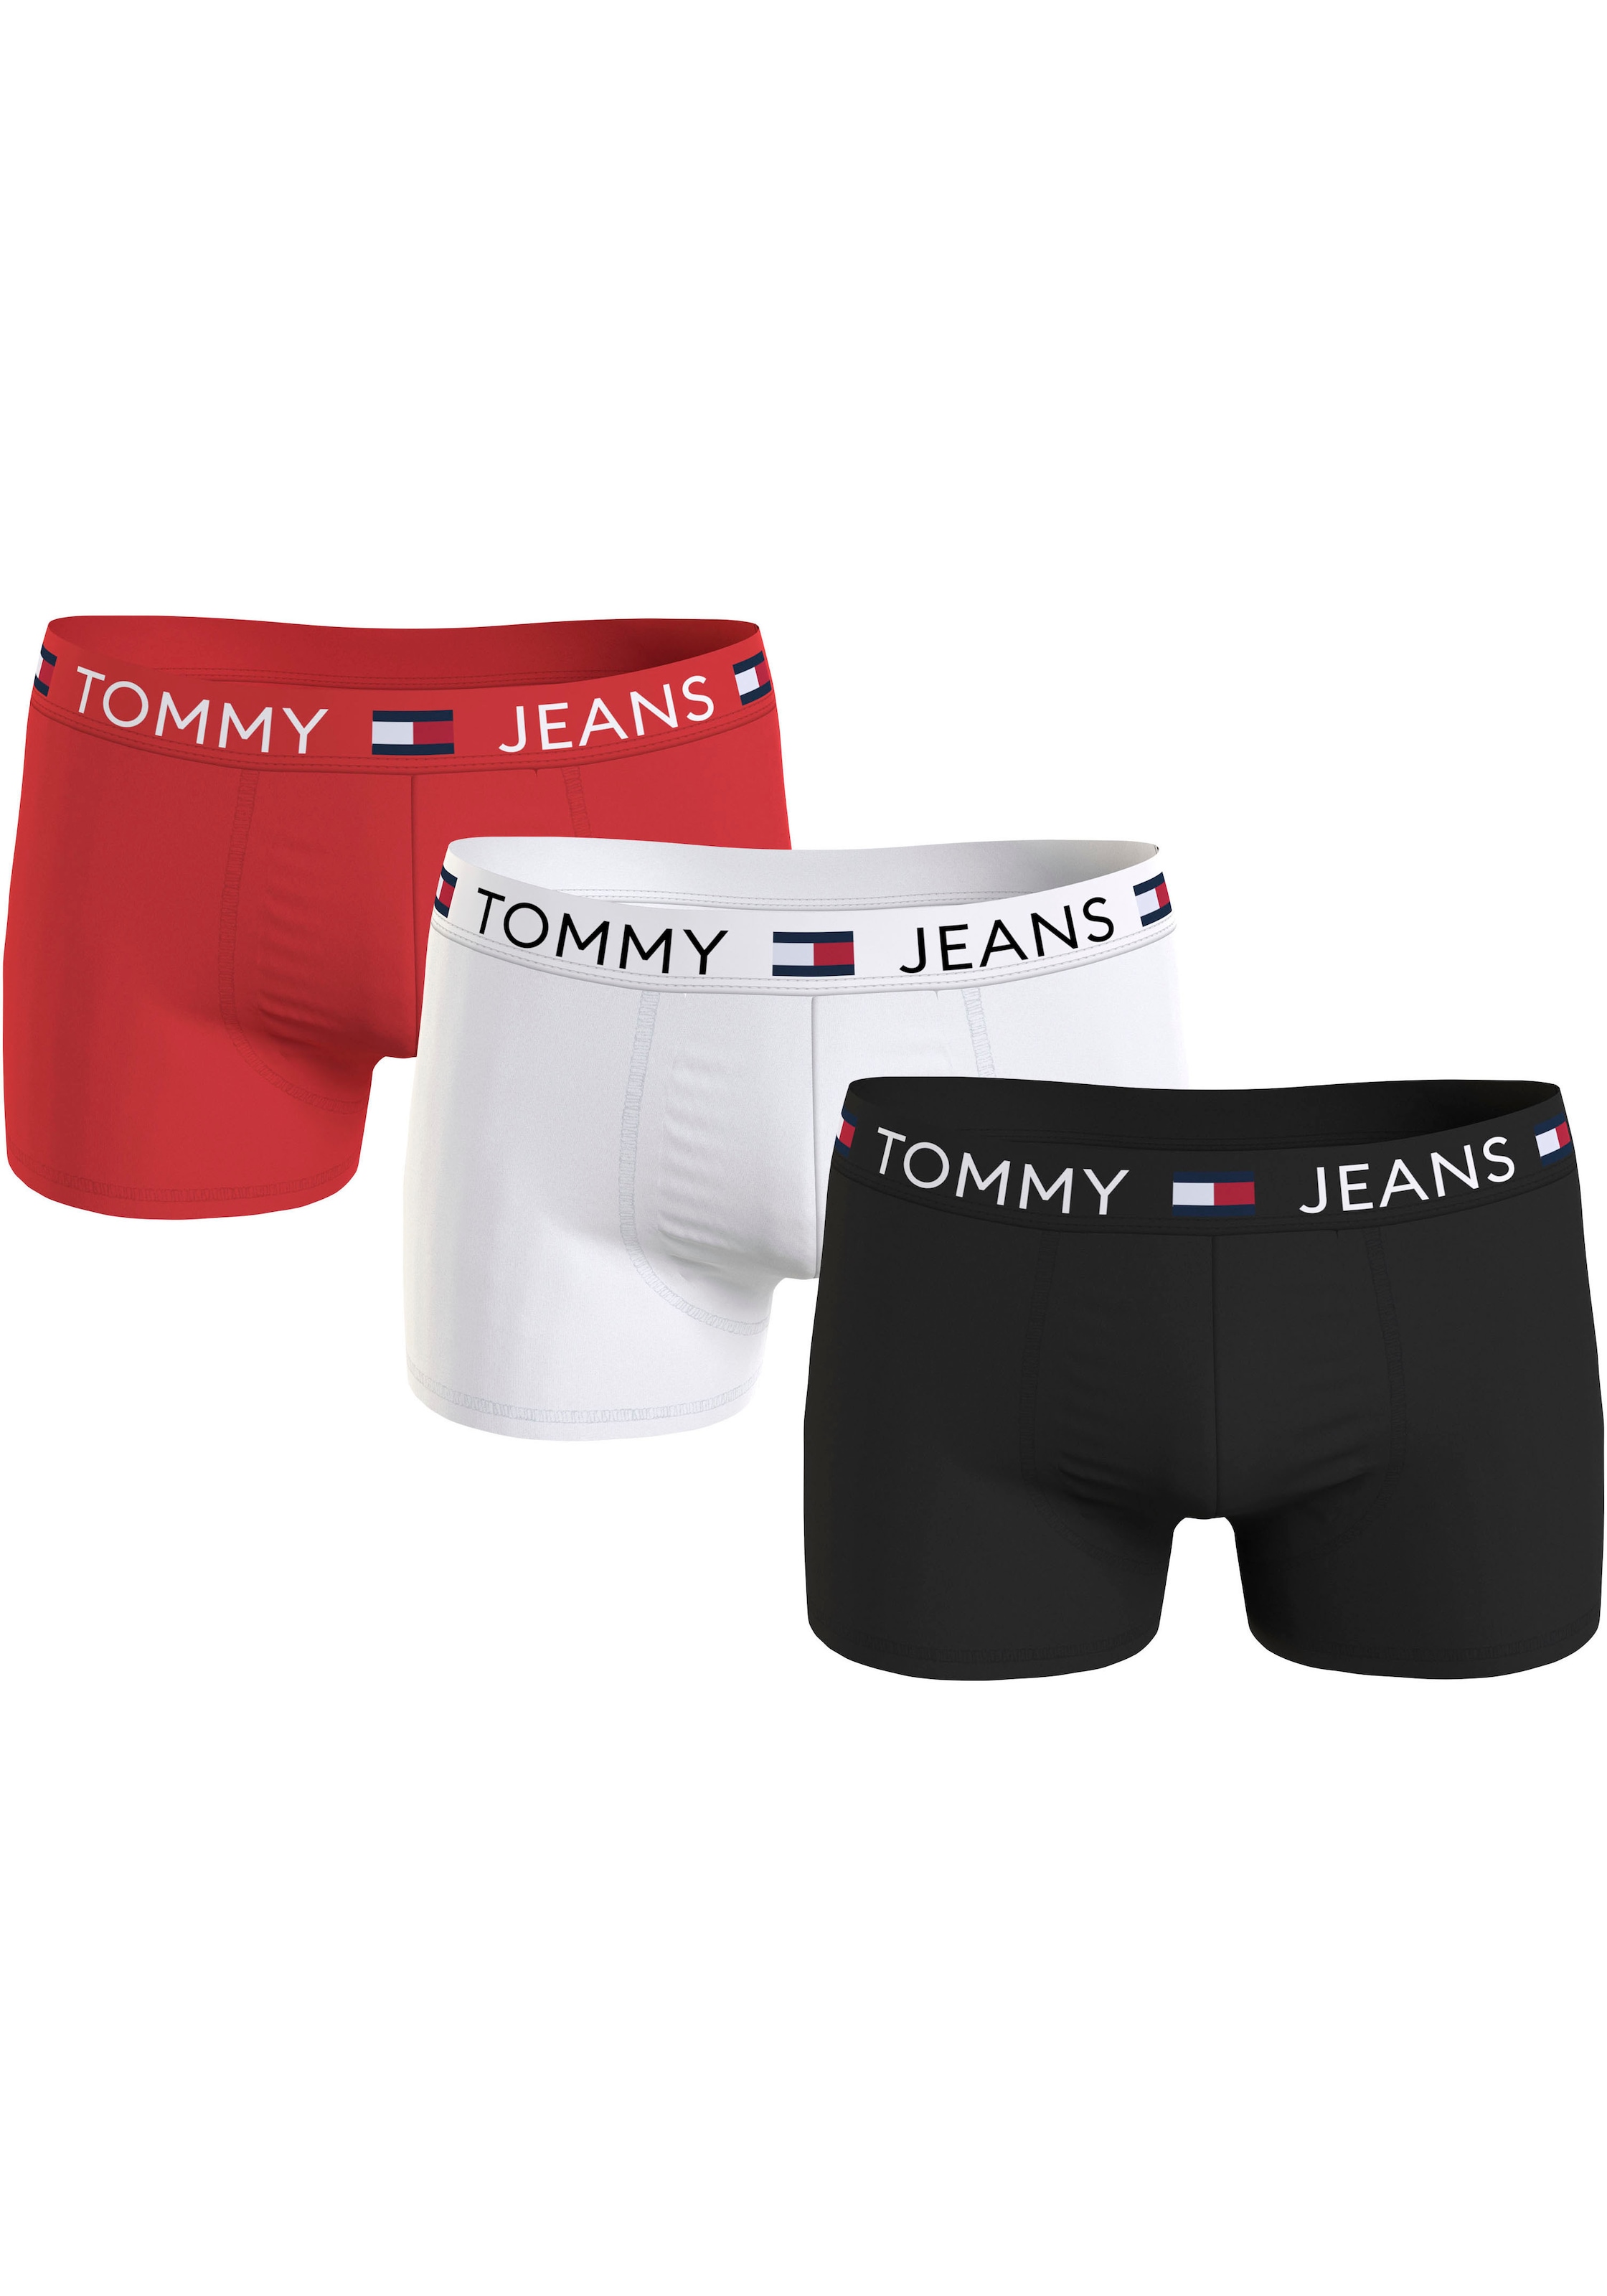 TOMMY HILFIGER Underwear TRUNK »3P TRUNK WB-DIFF BODY« (Packung...